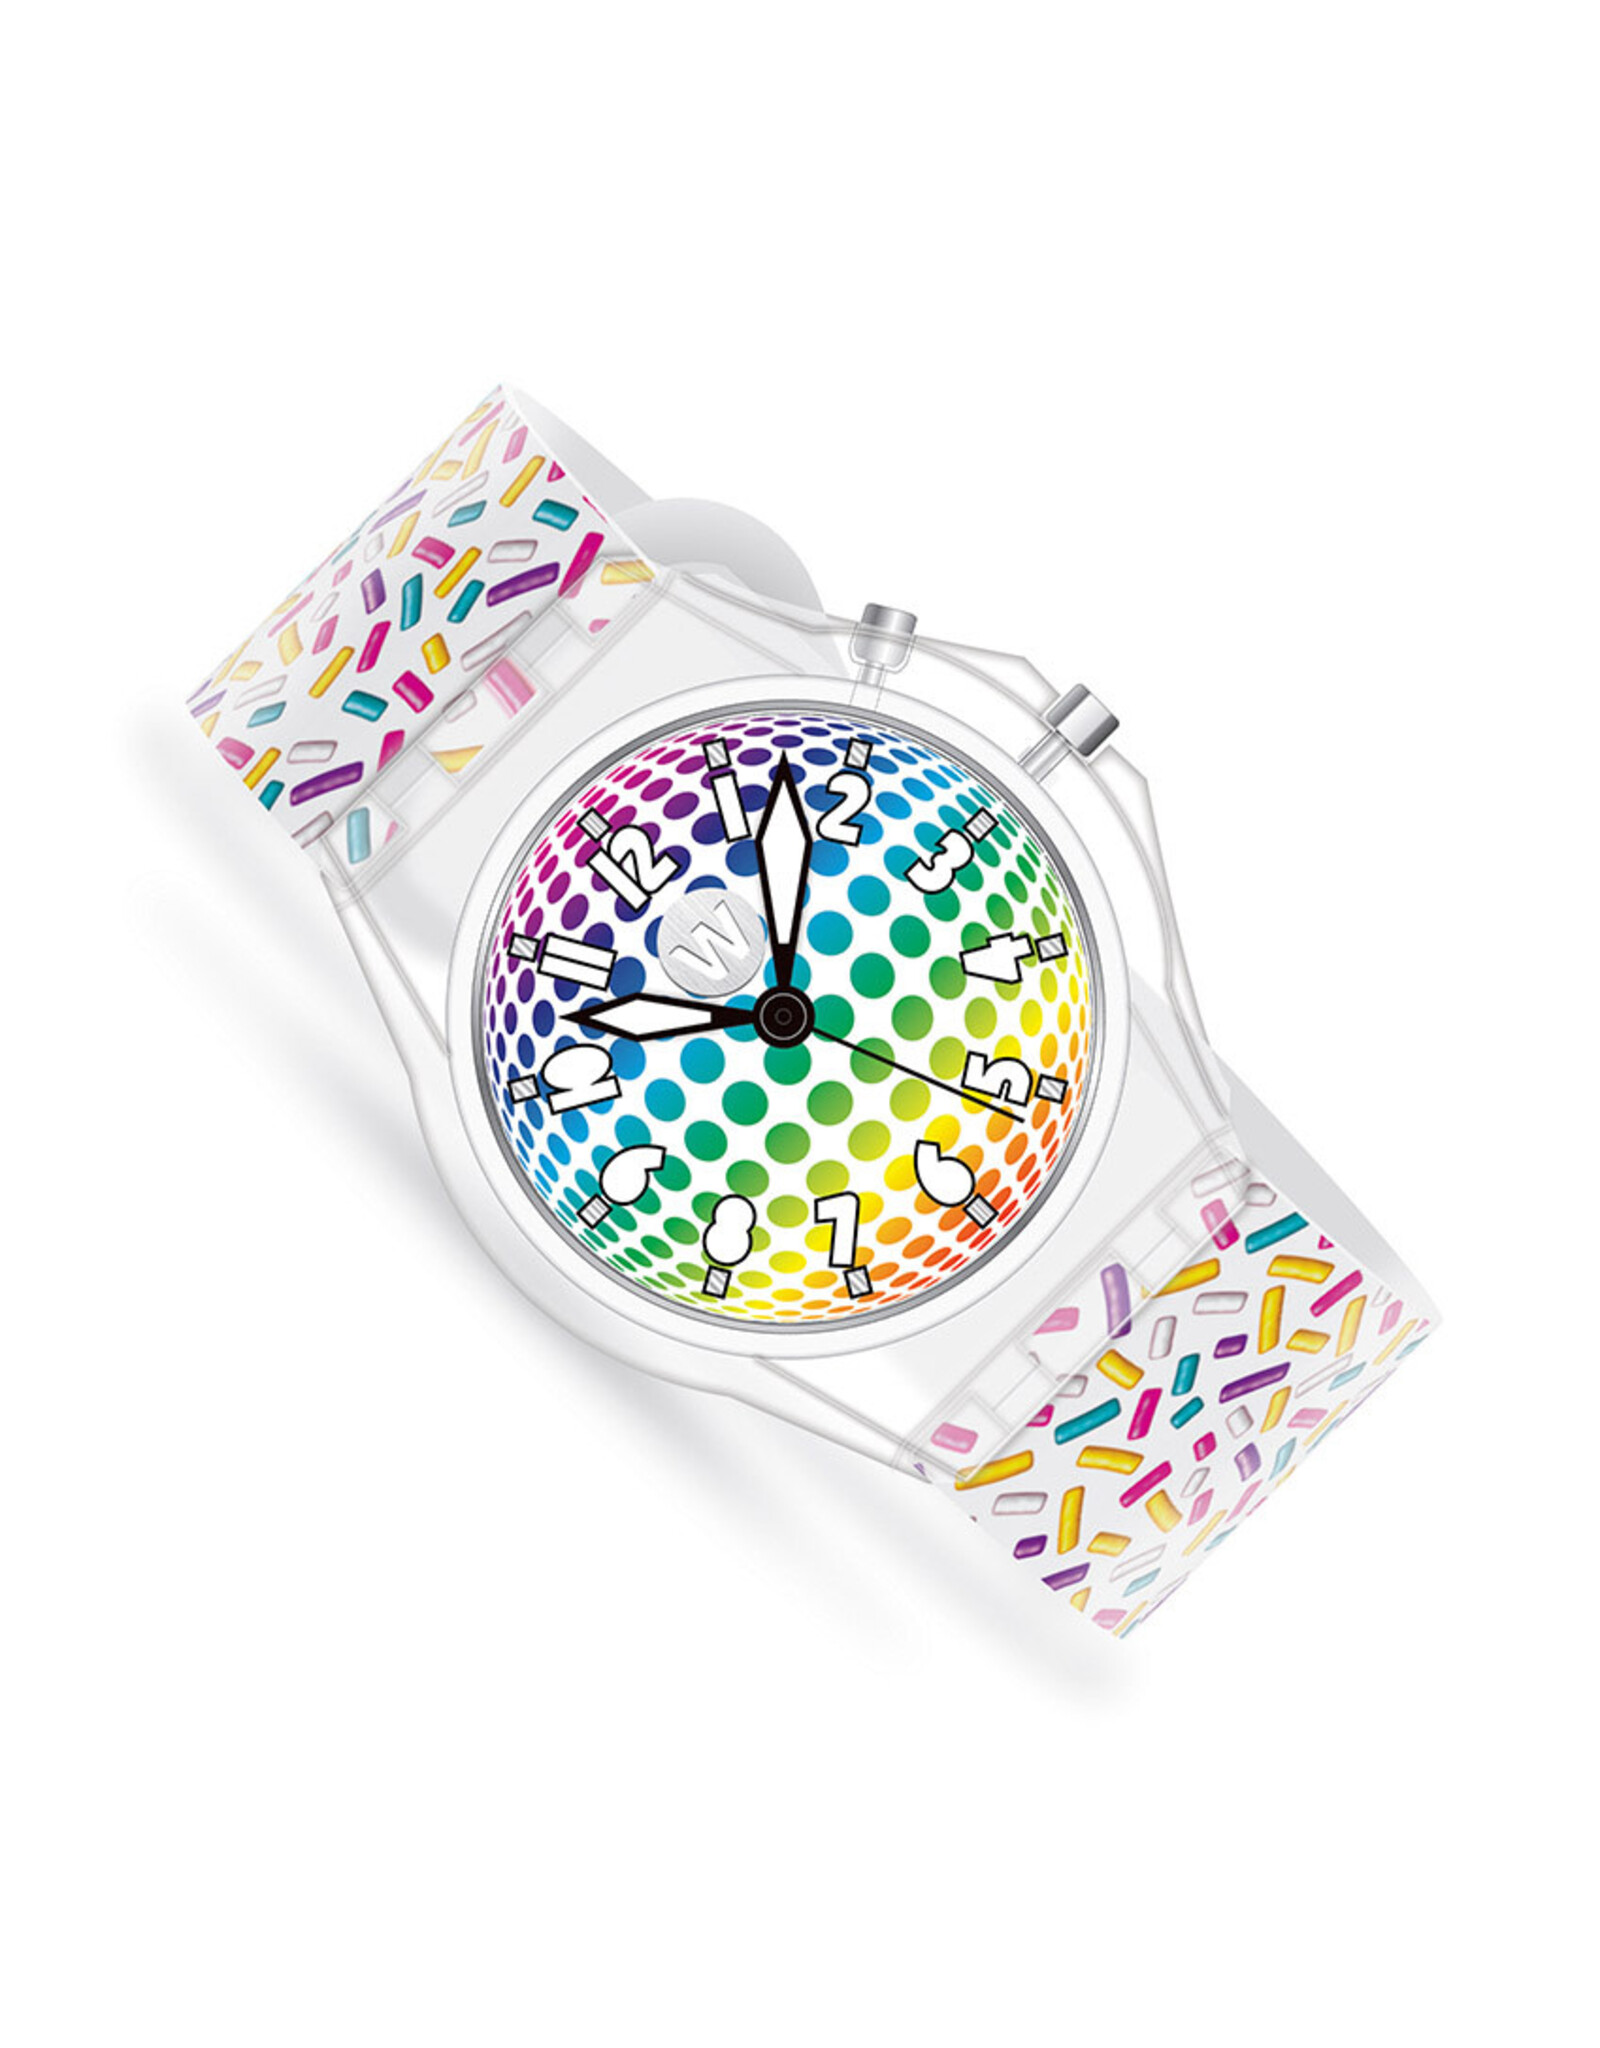 Watchitude Watchitude Glow Sprinkles - LED Light Up Watch